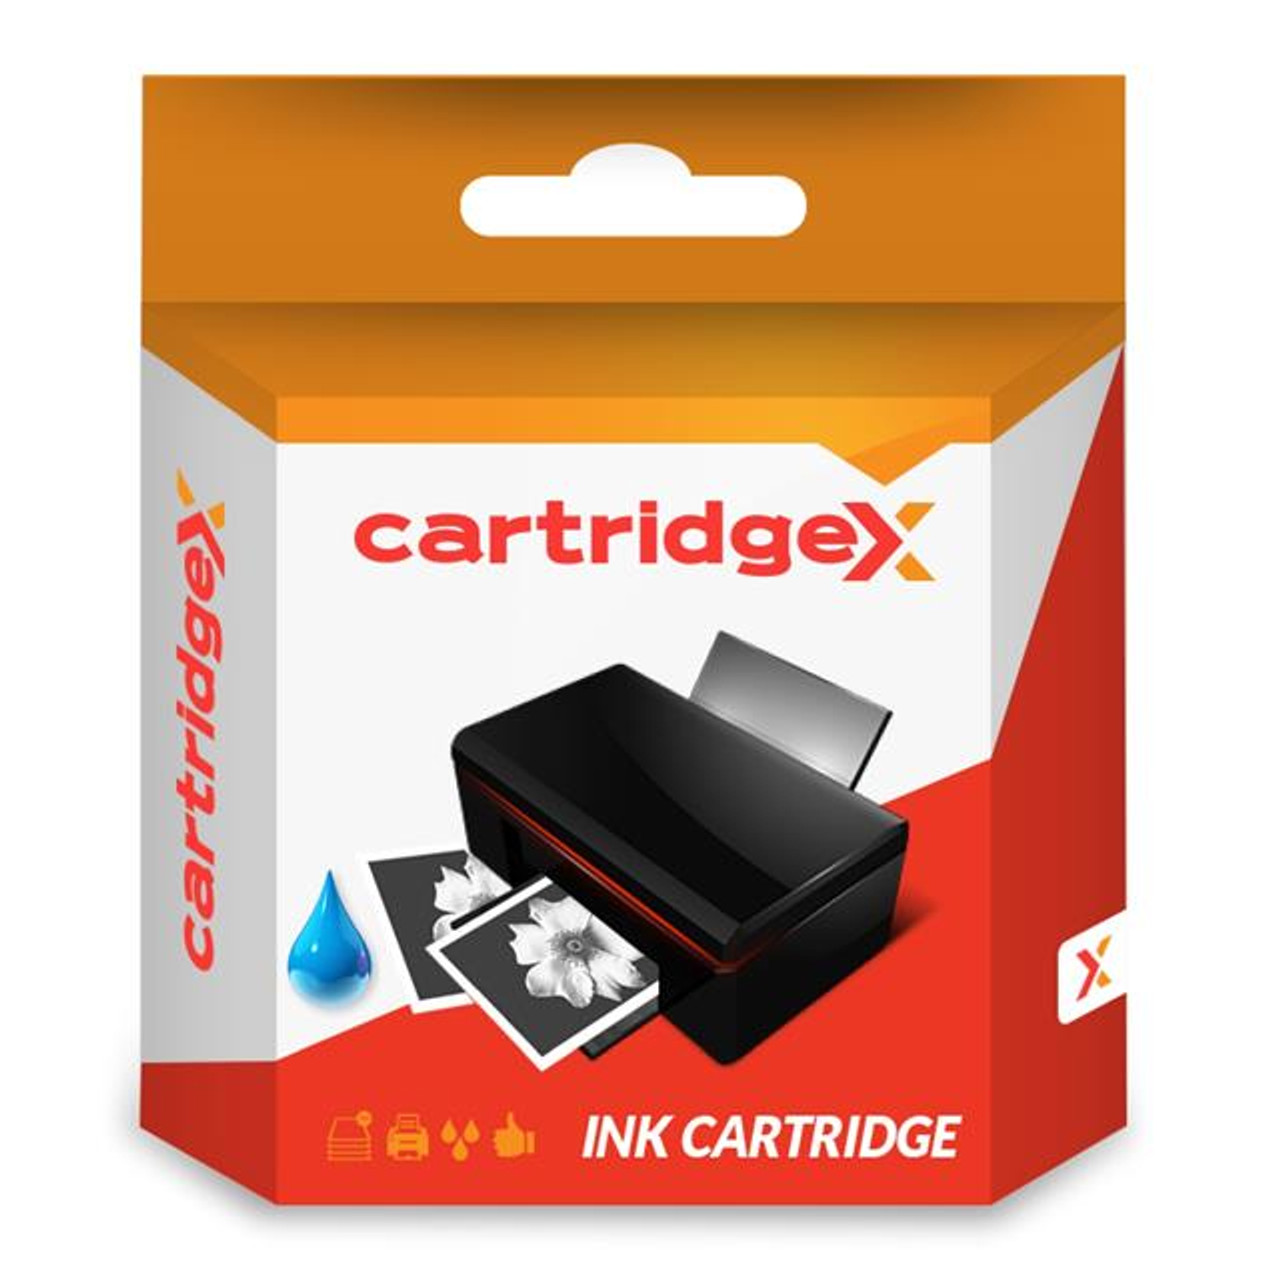 Compatible Cyan Ink Cartridge For Brother Fax-1940cn Fax-2440 Fax-2440c Lc900 C